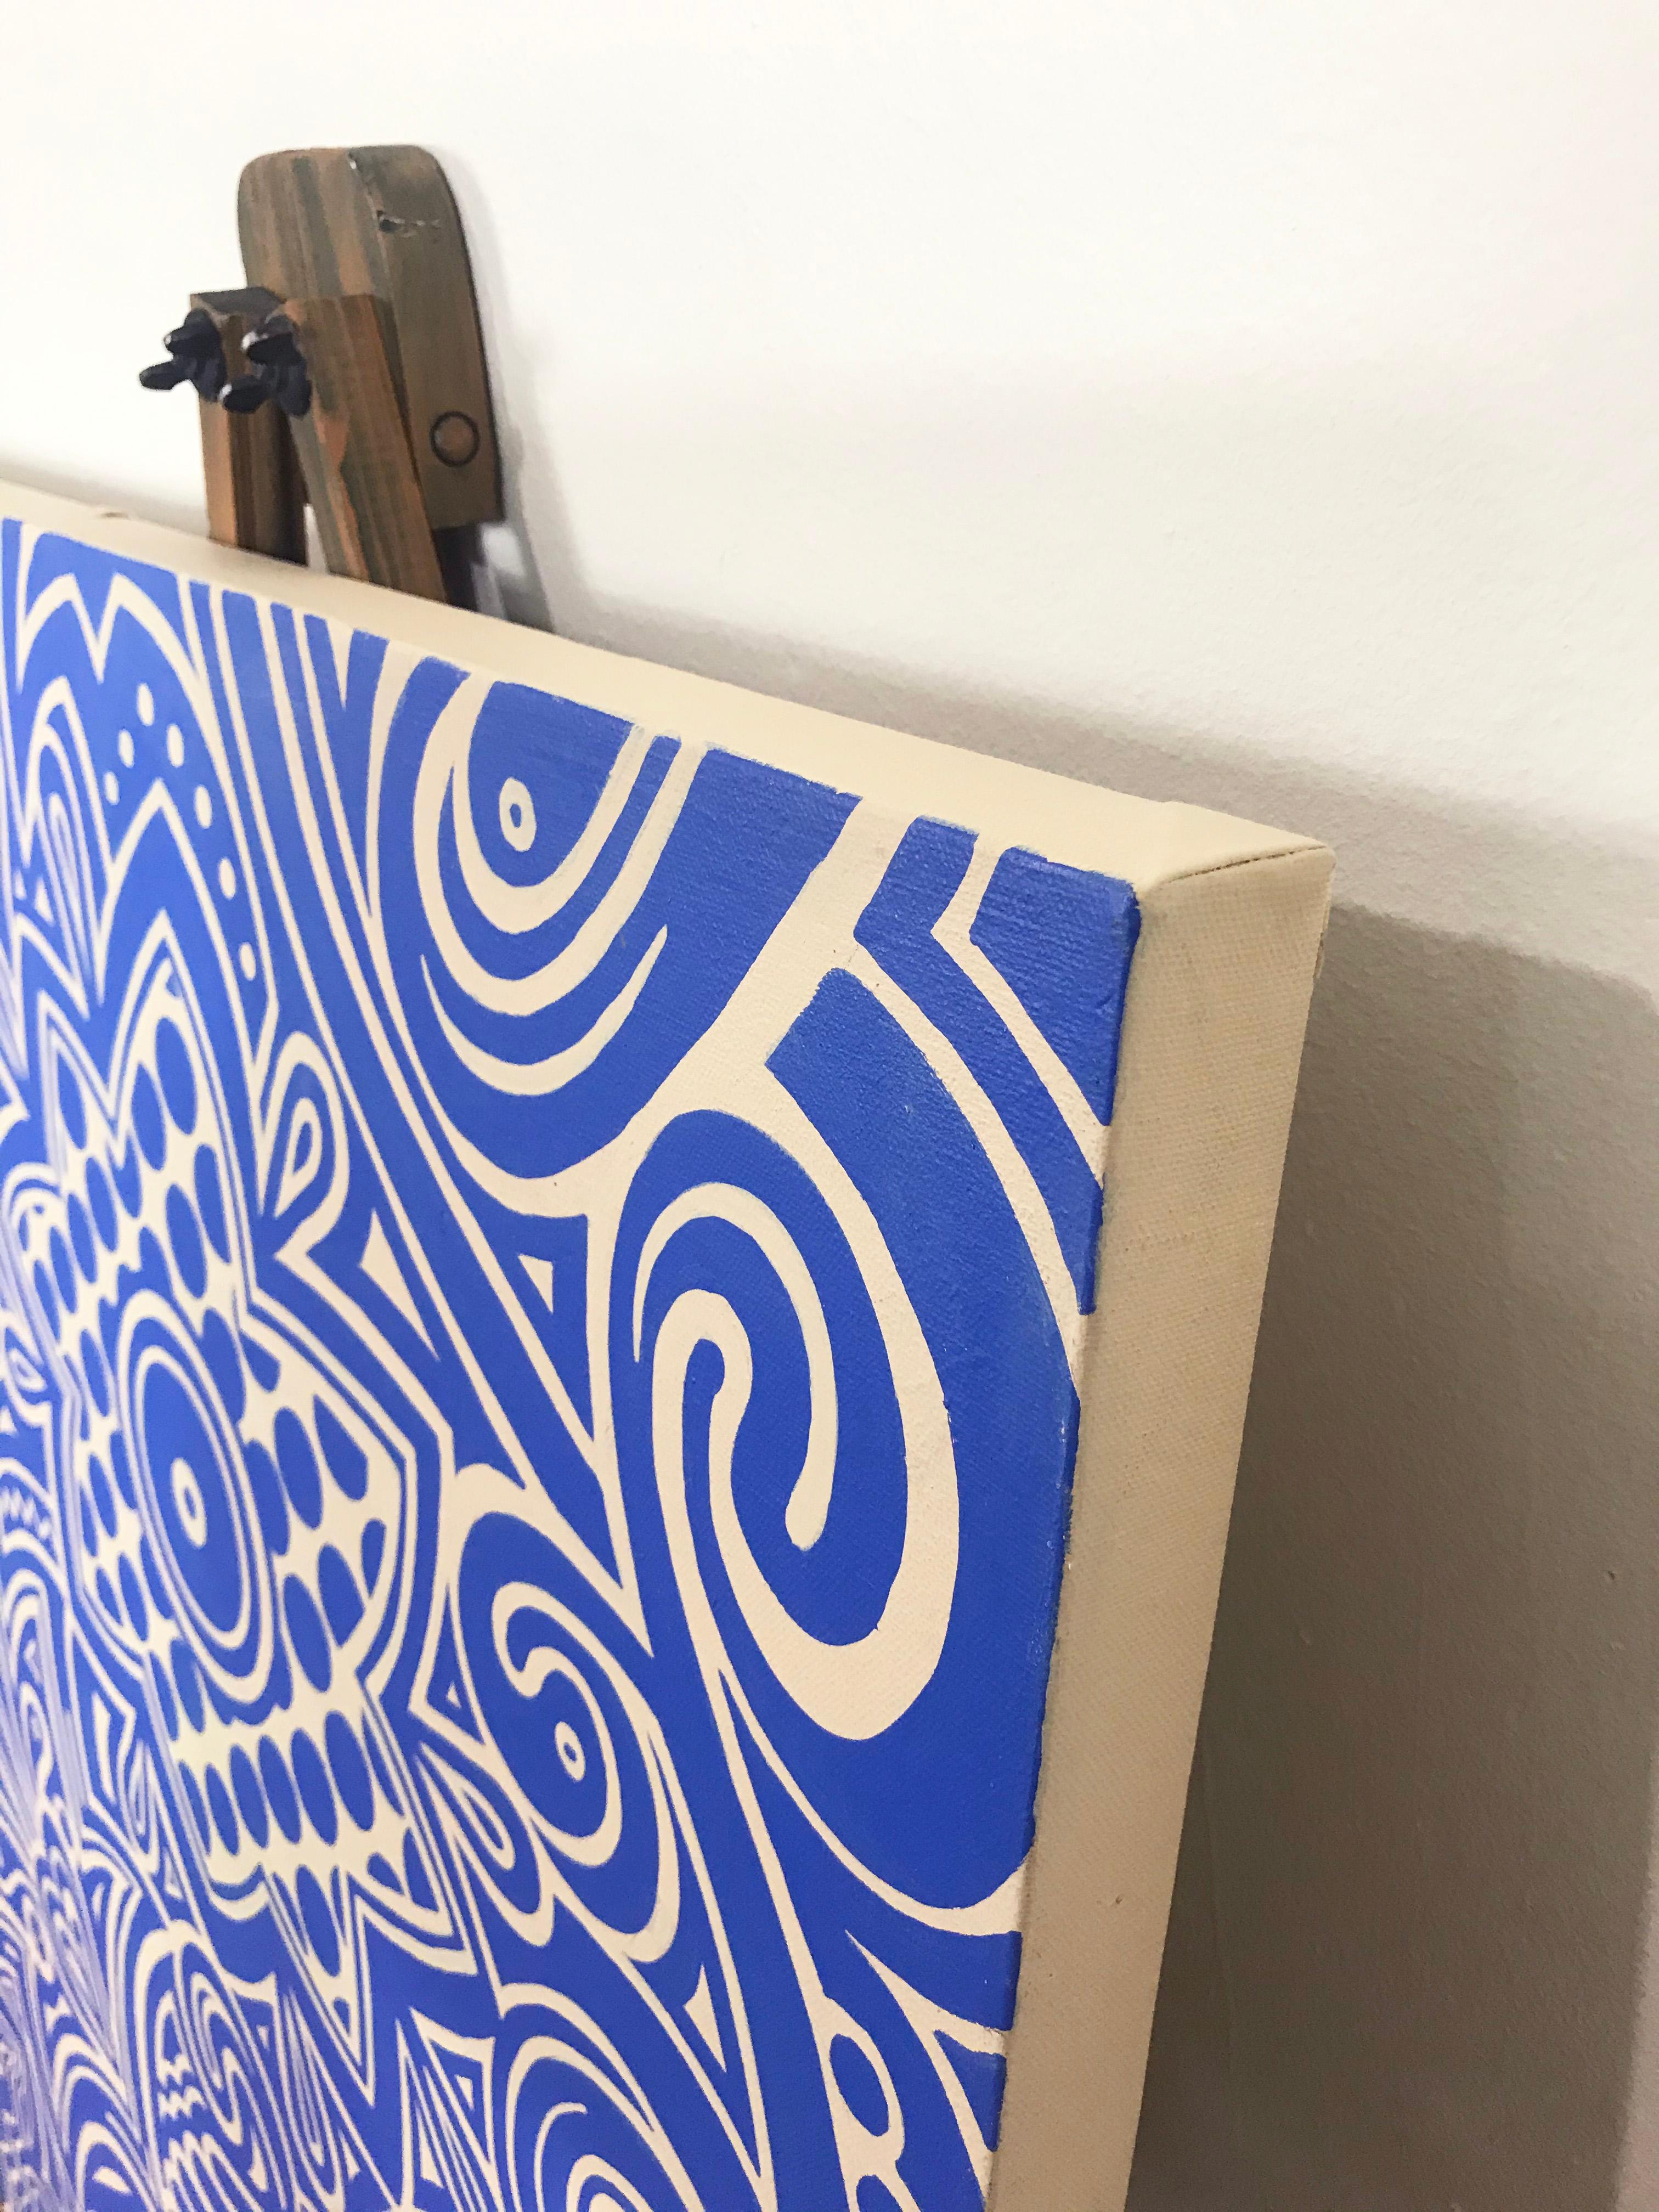 <p>Artist Comments<br />A bird in an ultramarine blue garden of stylized, graphic flowers. Part of a series of paintings and wood cutouts inspired by artist Johnny Karwan's love of pattern and the natural expression of simplicity and flow. 